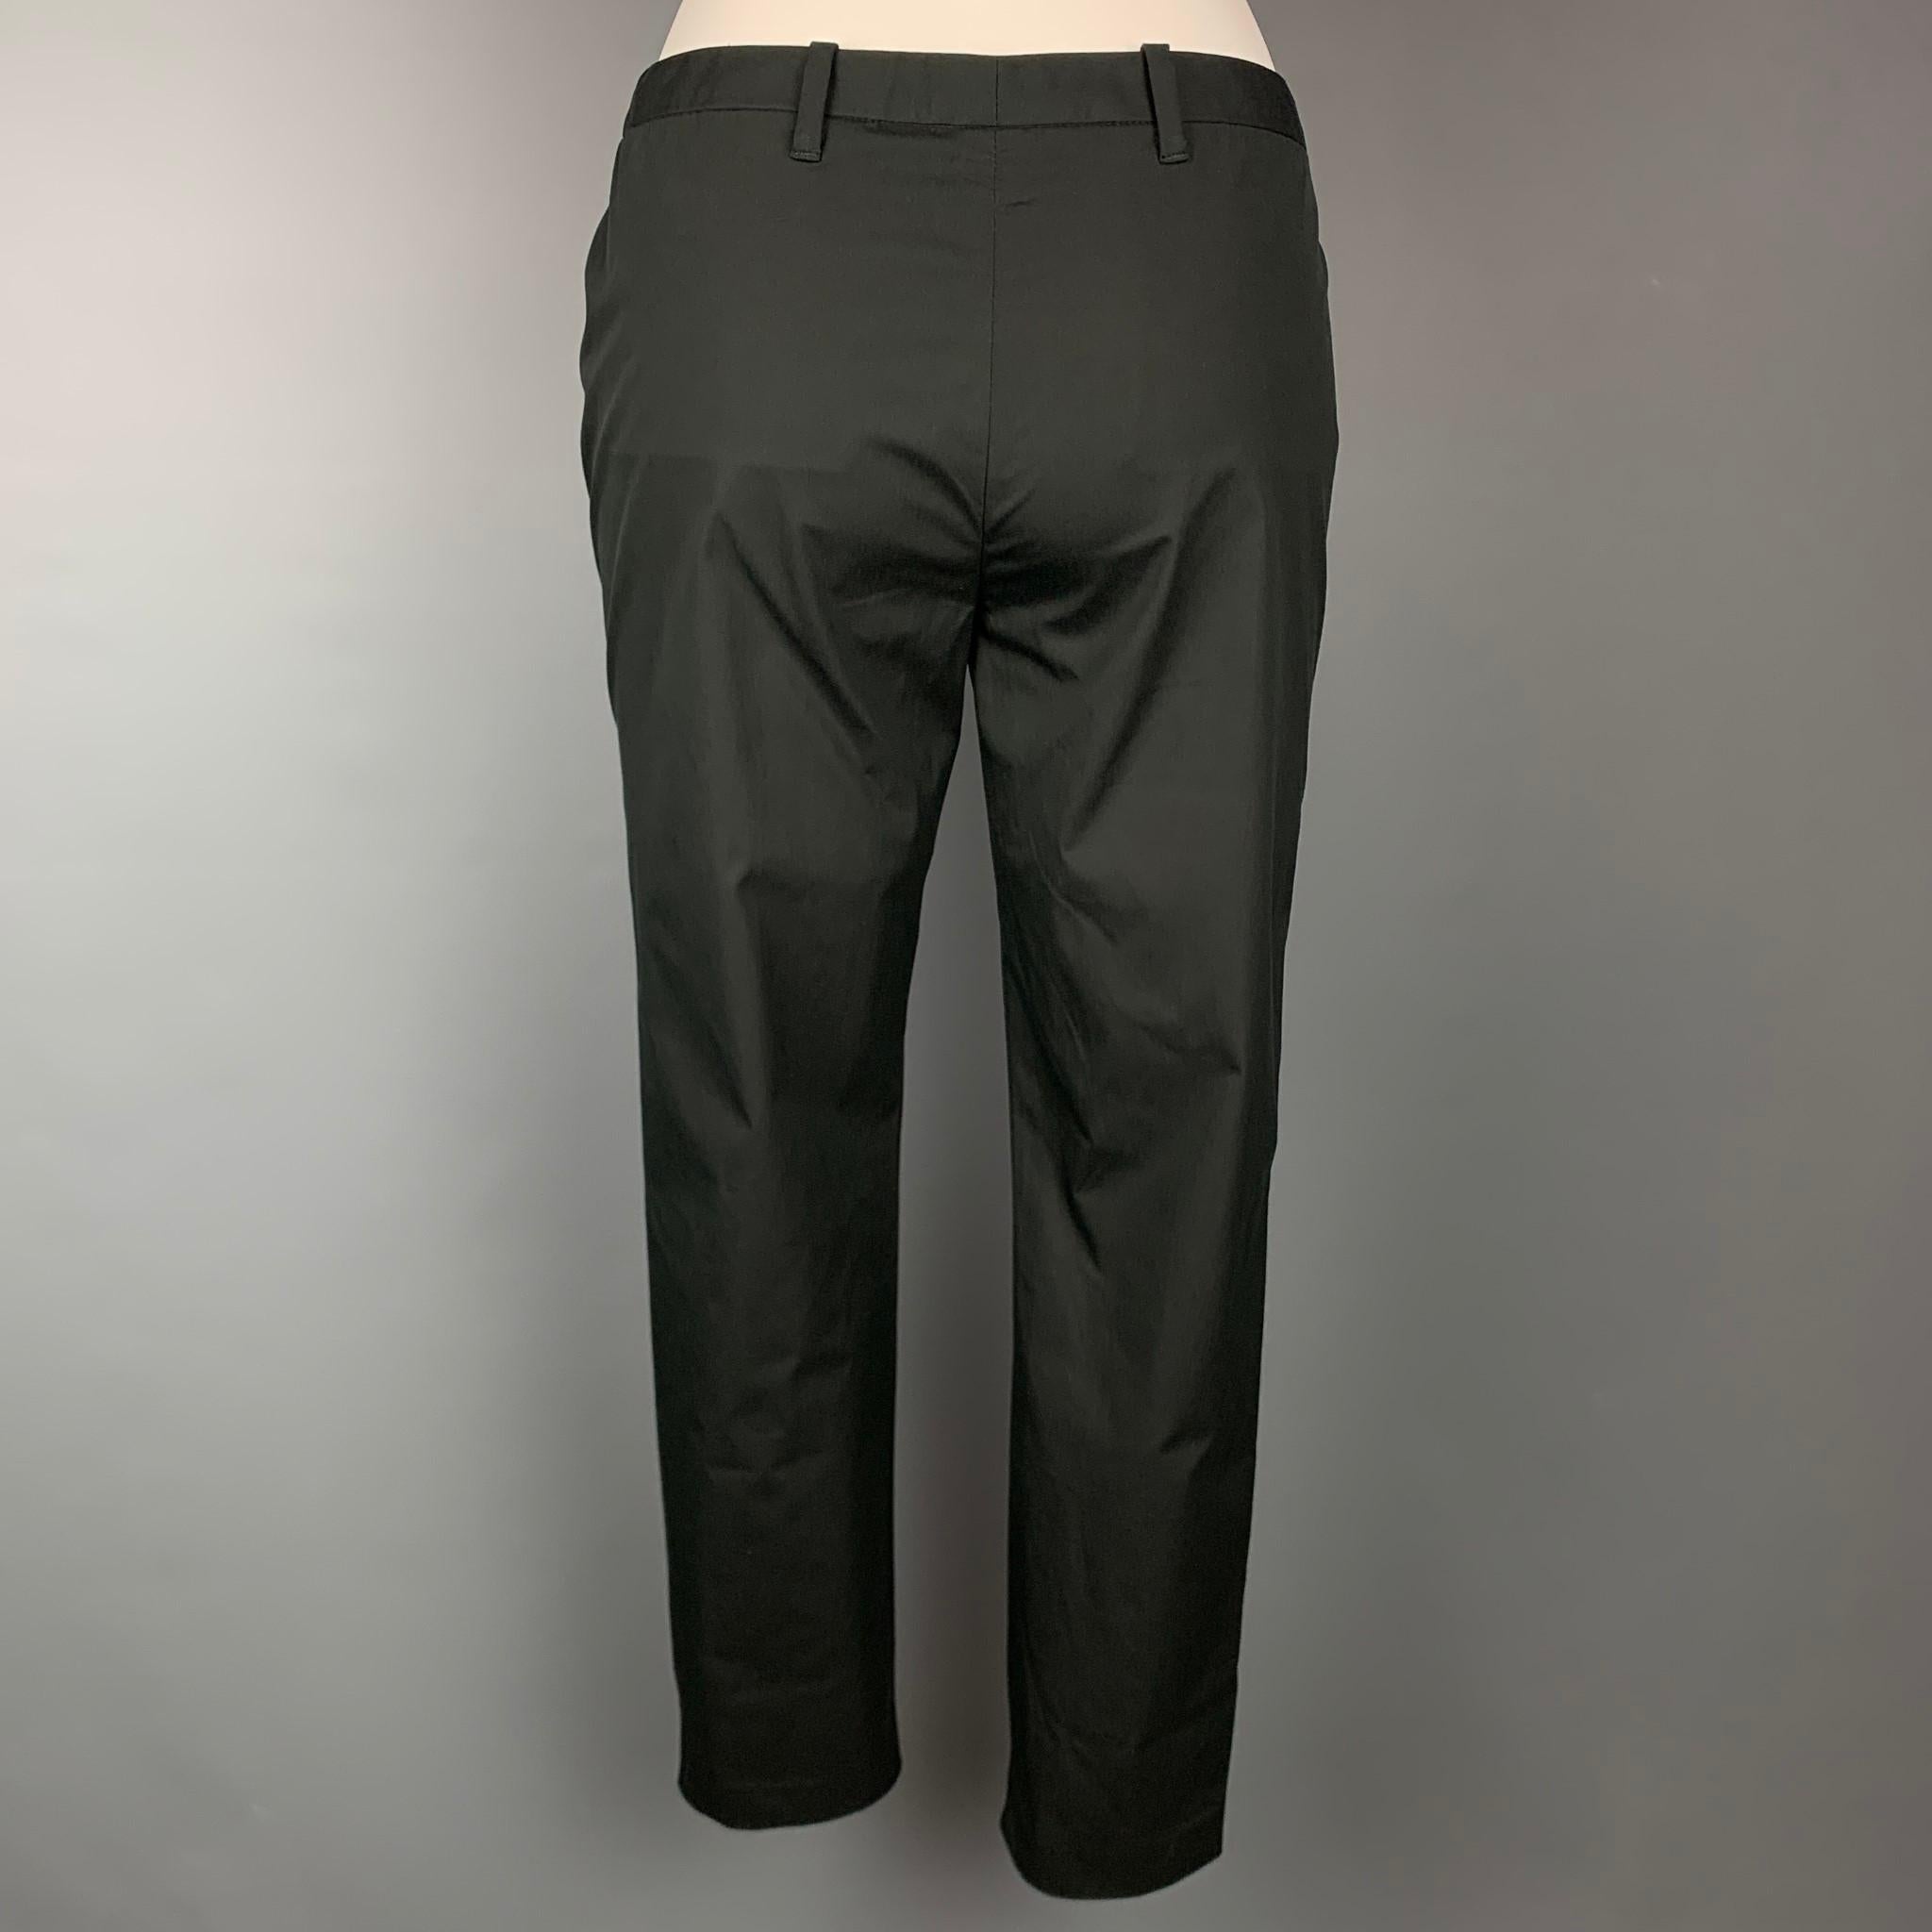 CoSTUME NATIONAL dress pants comes in a black cotton blend featuring a narrow leg, slit pockets, front tab, and a zip fly closure. Made in Italy.

Very Good Pre-Owned Condition.
Marked: IT 40

Measurements:

Waist: 29 in.
Rise: 8.5 in.
Inseam: 28